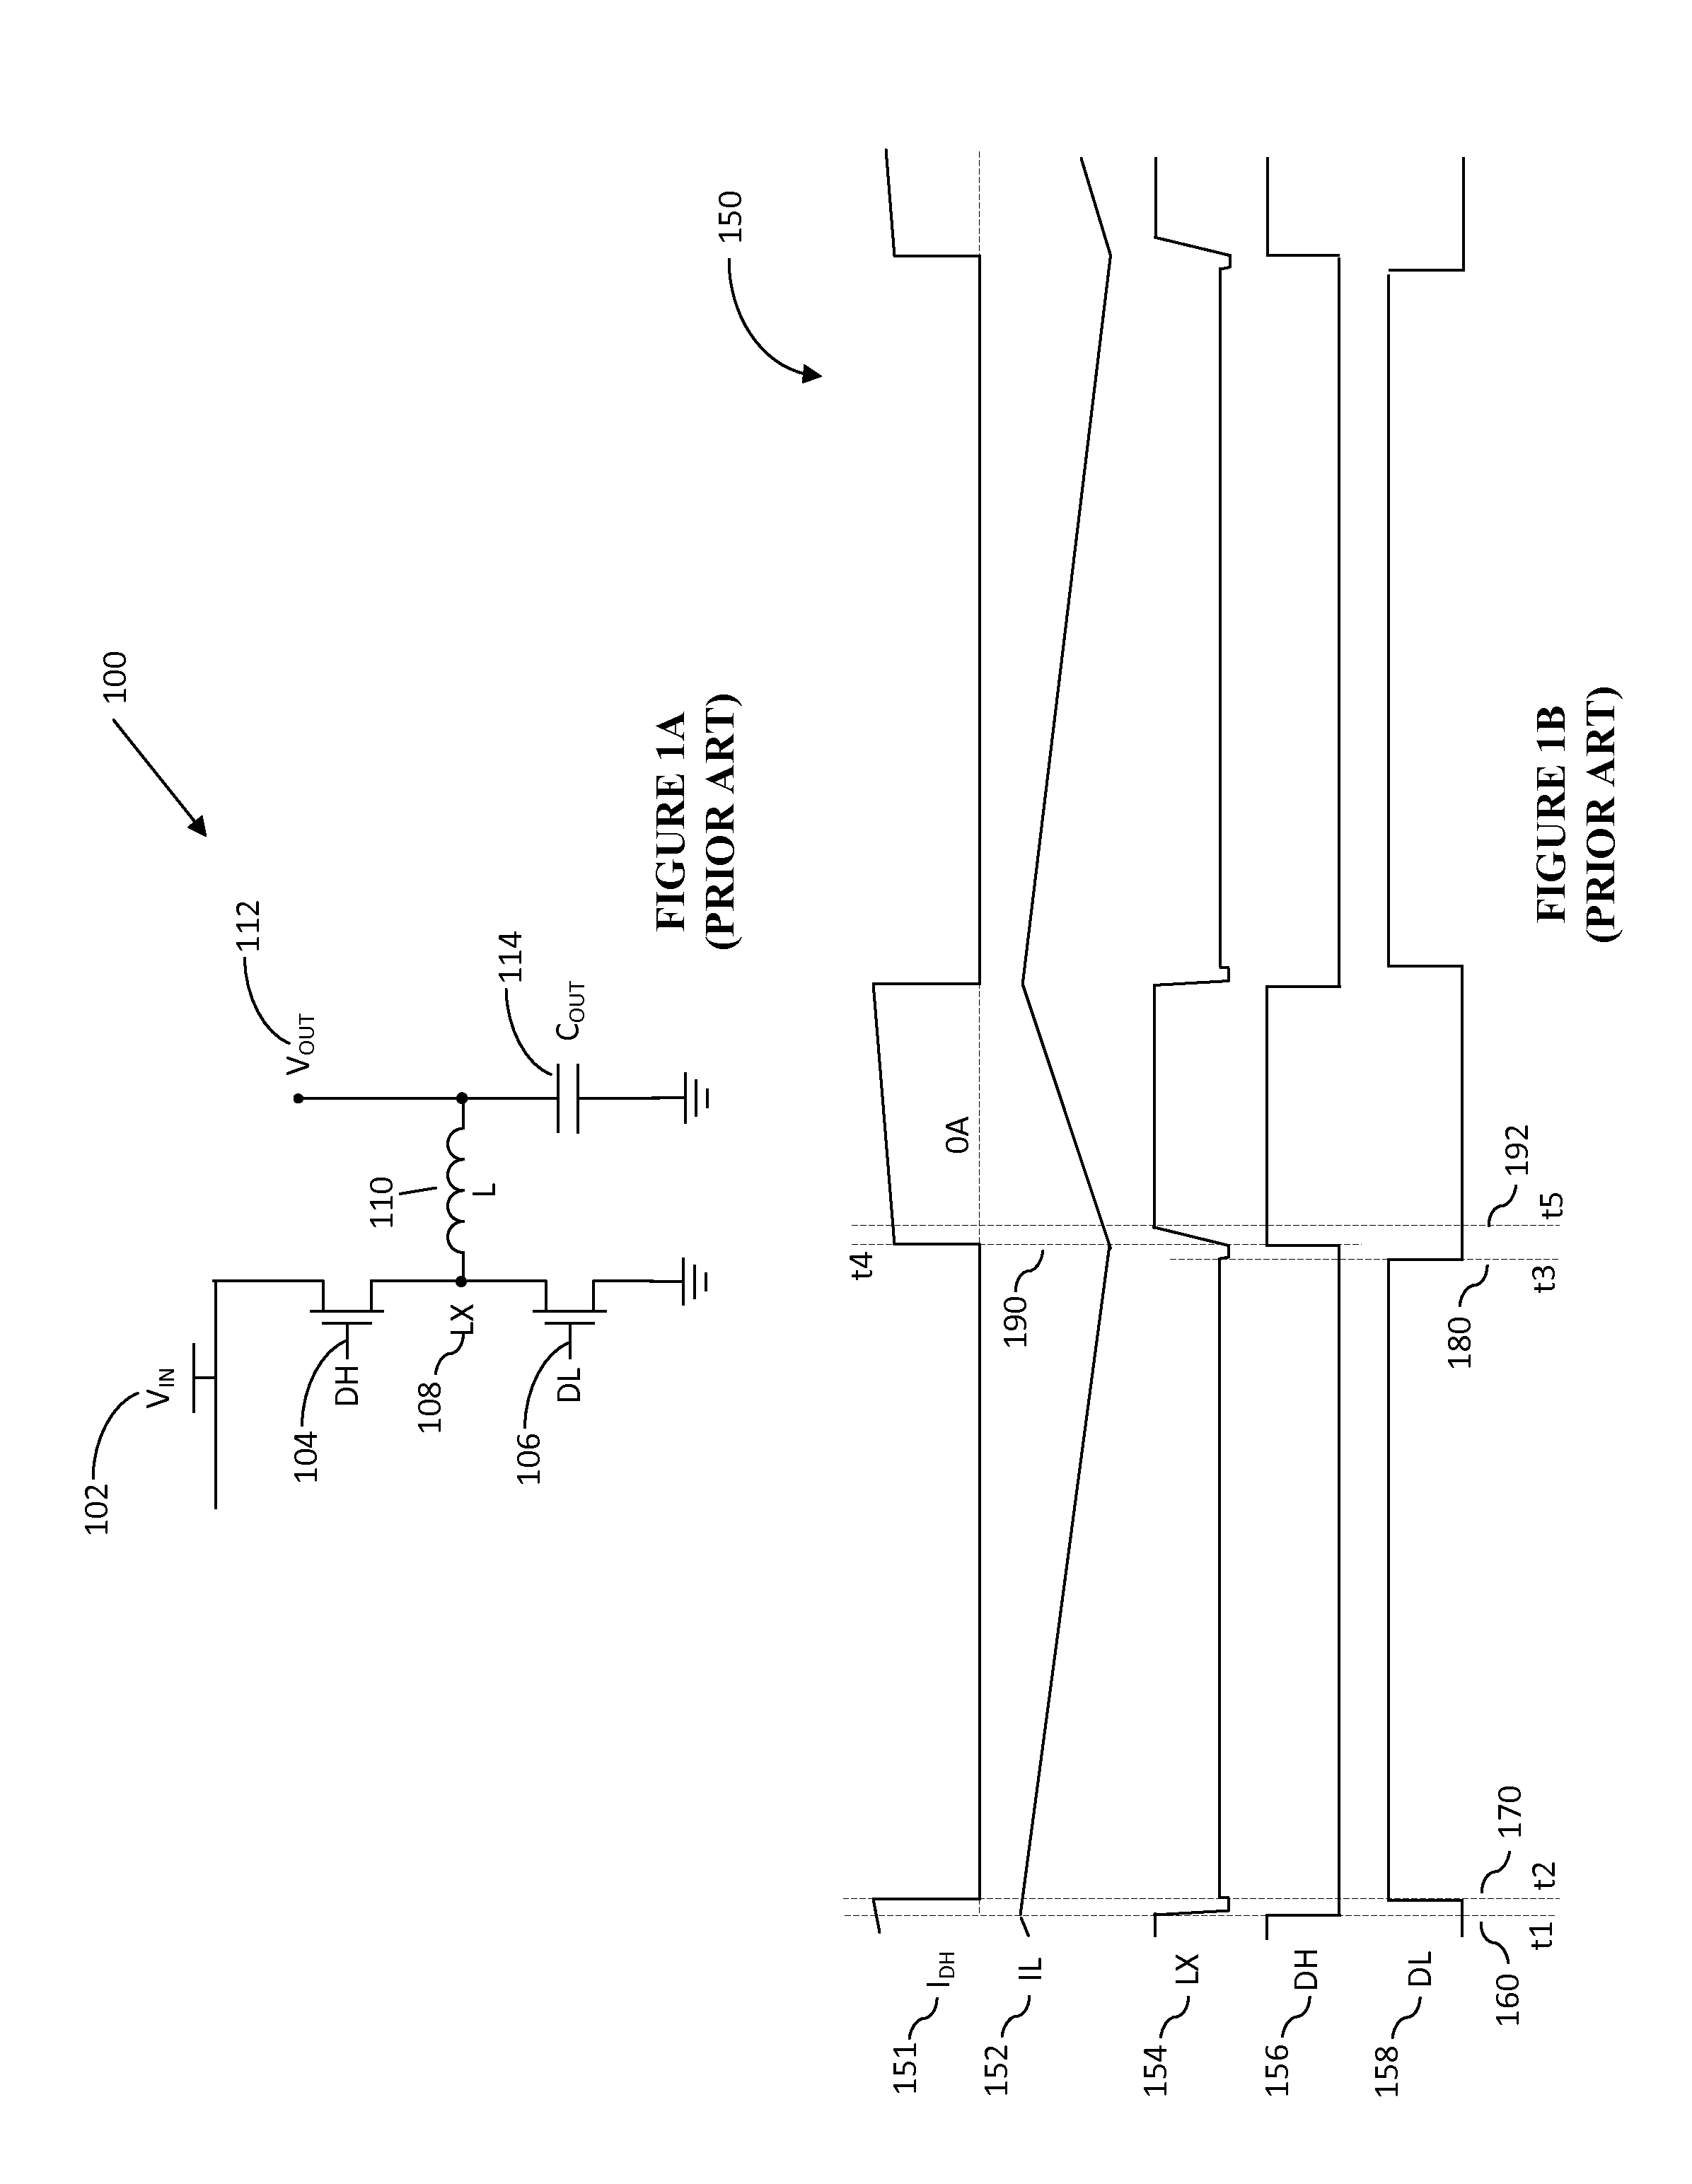 System and method to eliminate transition losses in DC/DC converters